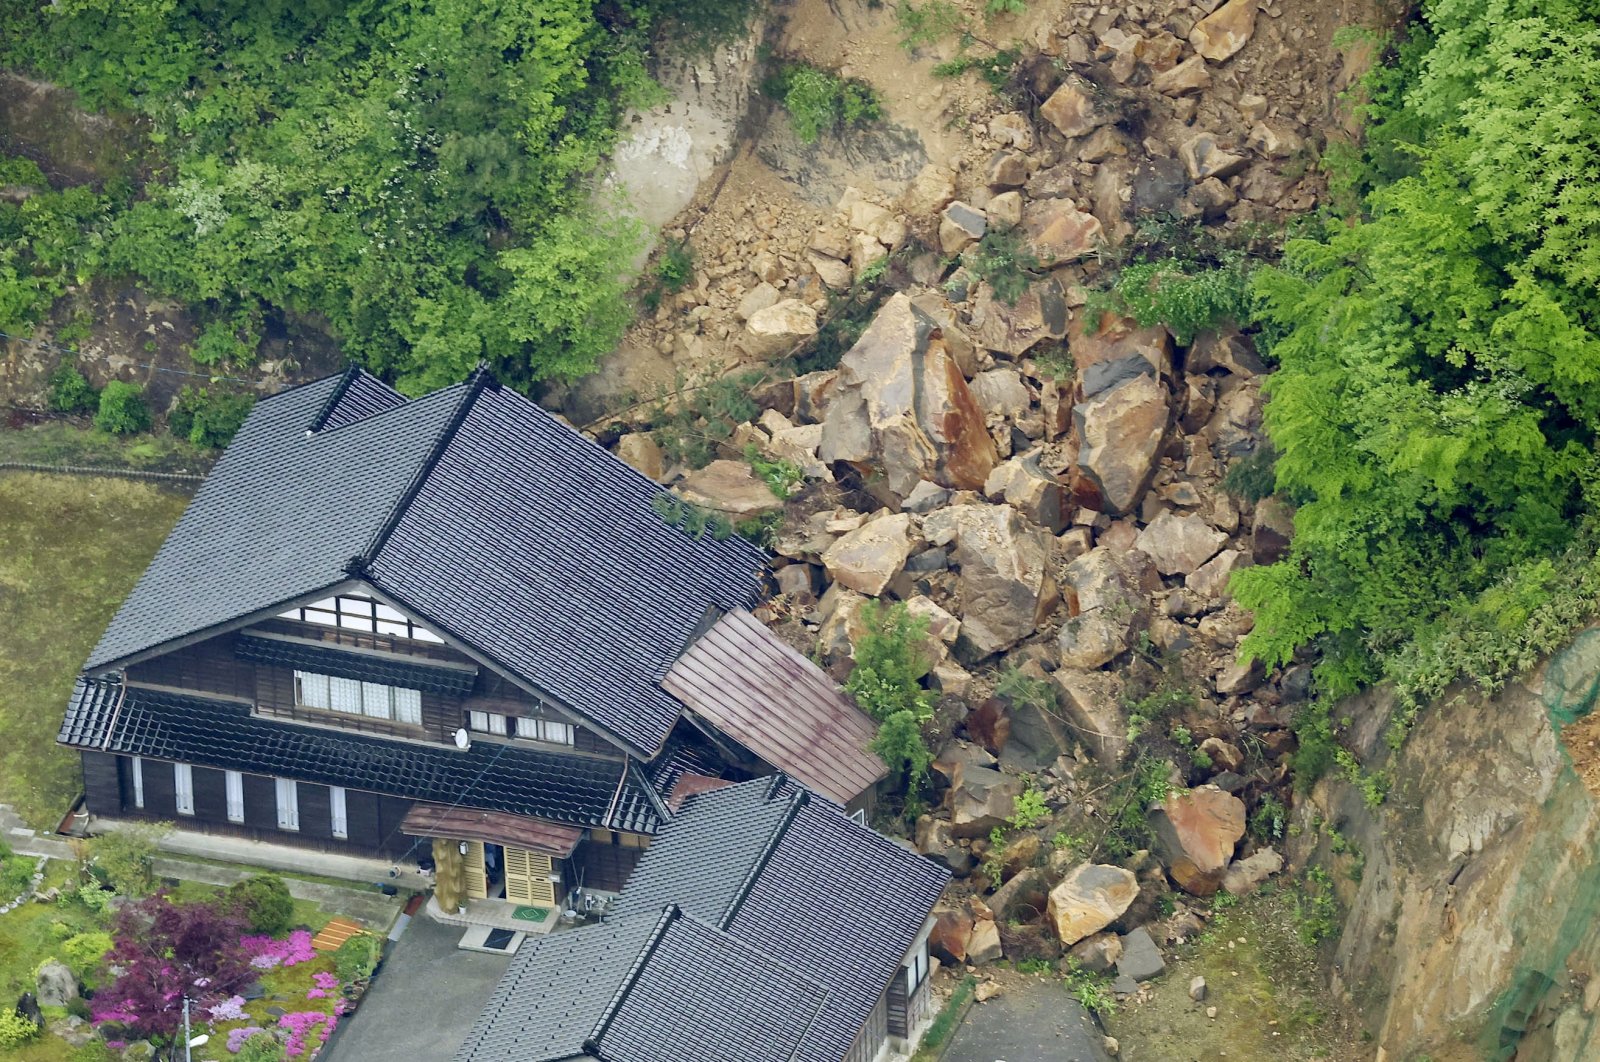 A landslide site, in the aftermath of an earthquake, is seen in Suzu, Ishikawa prefecture, Japan, May 6, 2023. (Reuters Photo)